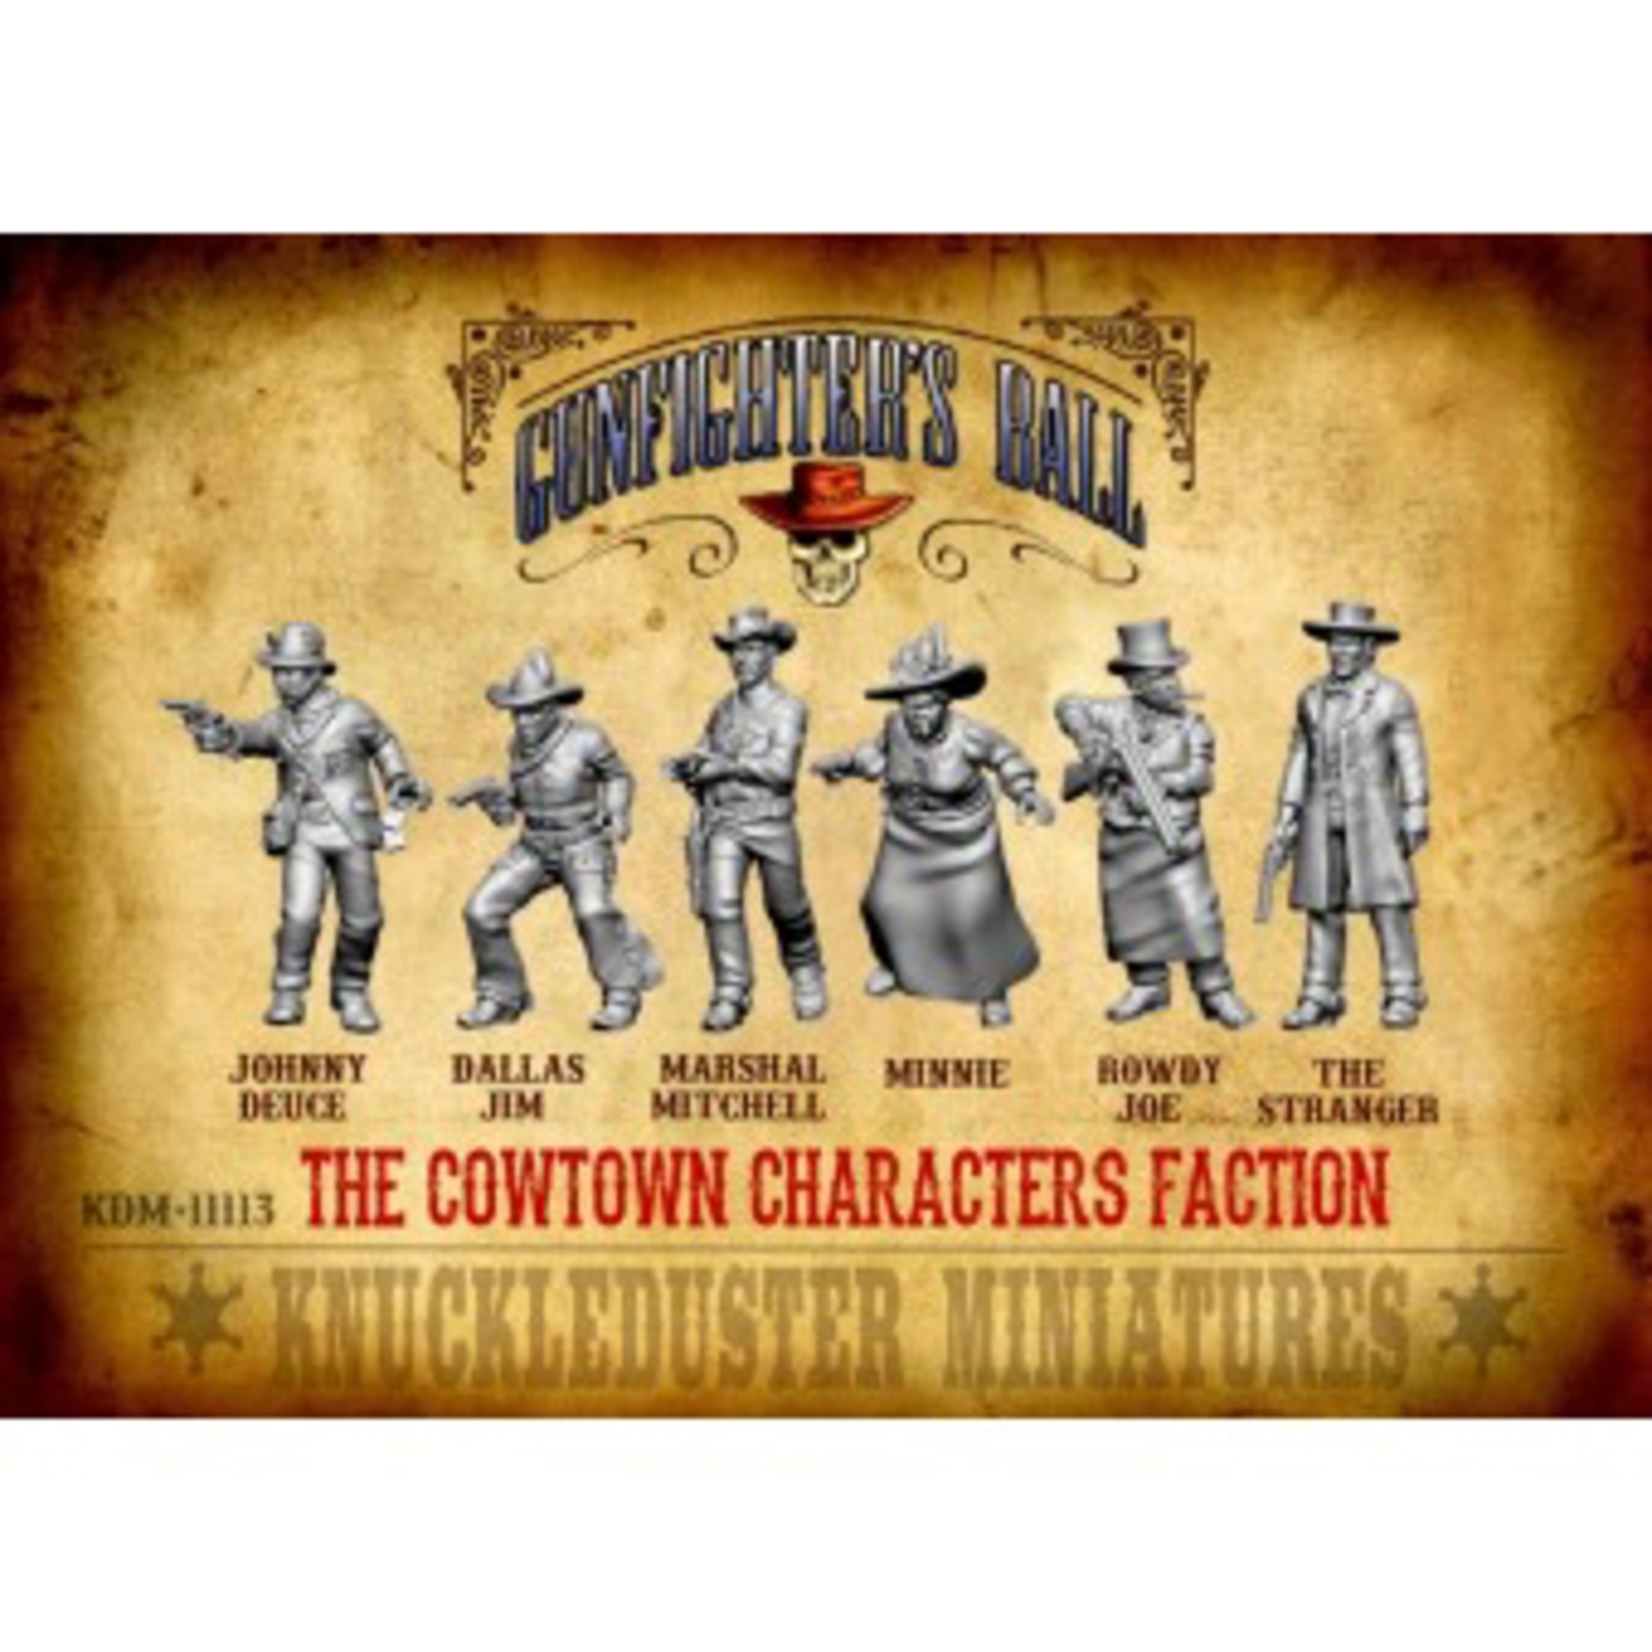 Cowtown Characters Faction